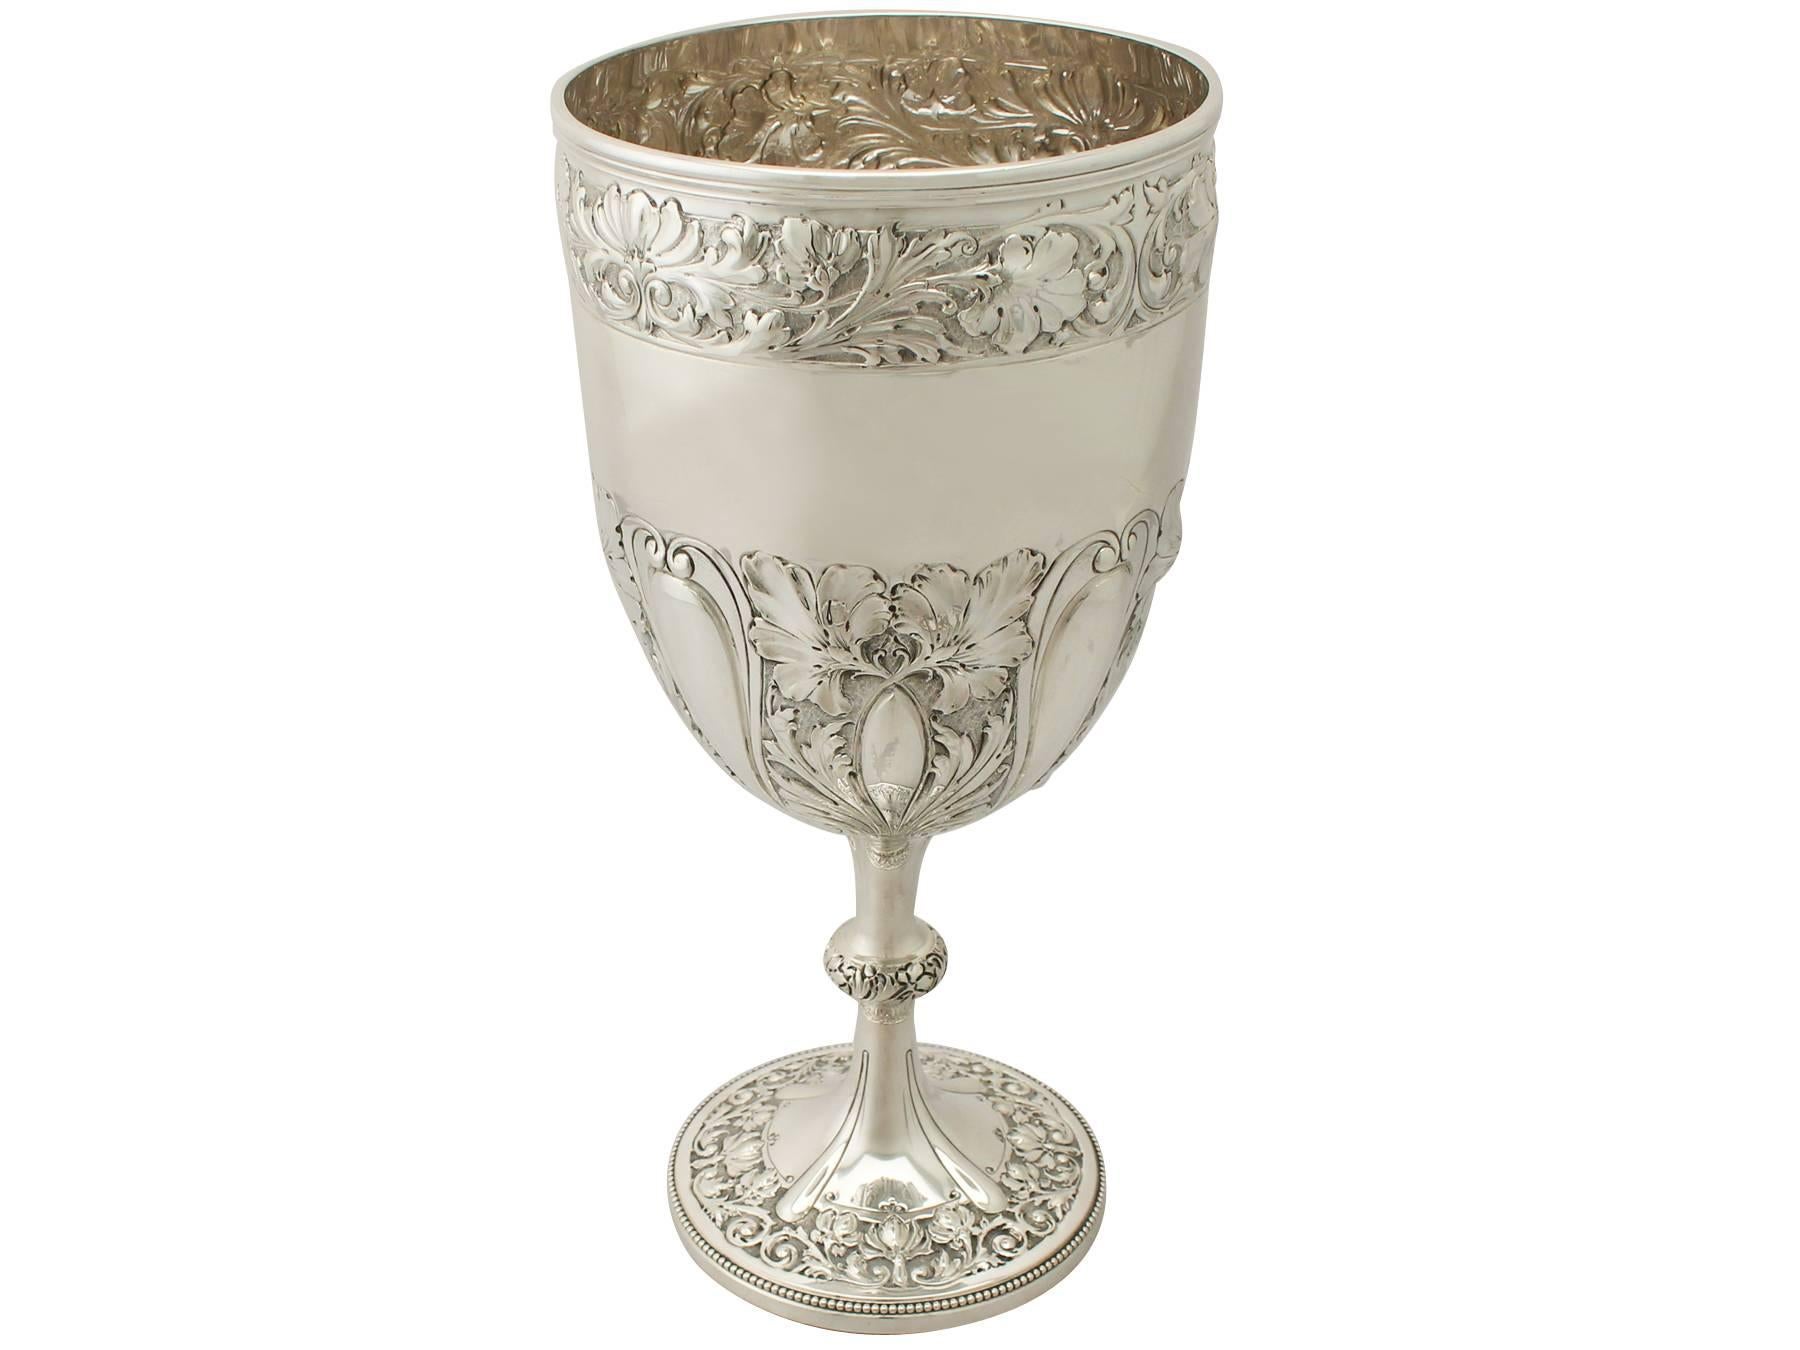 An exceptional, fine and impressive, large antique Victorian English sterling silver presentation cup; an addition to our presentation silverware collection.

This exceptional antique Victorian sterling silver presentation cup has a plain circular